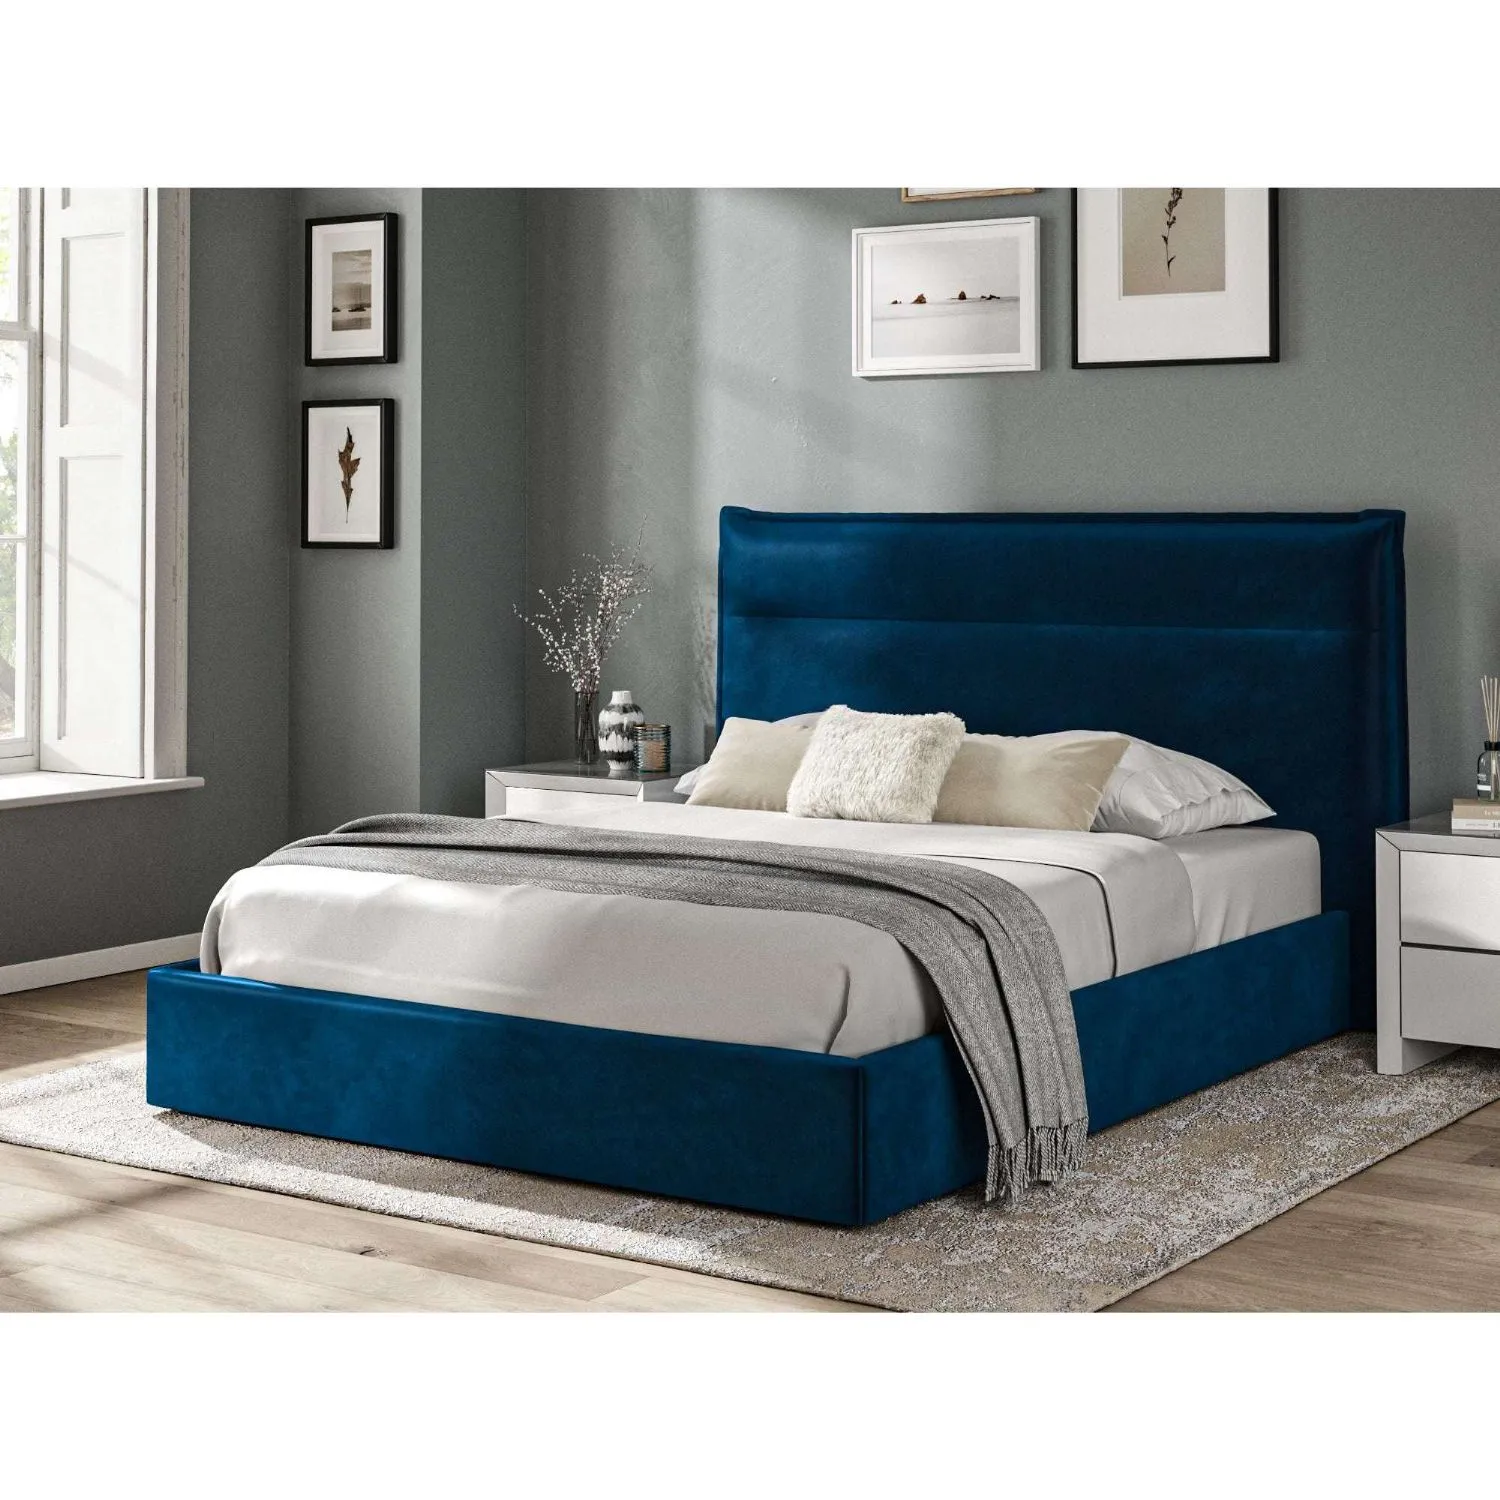 Fabric Bed Collection Blue 5